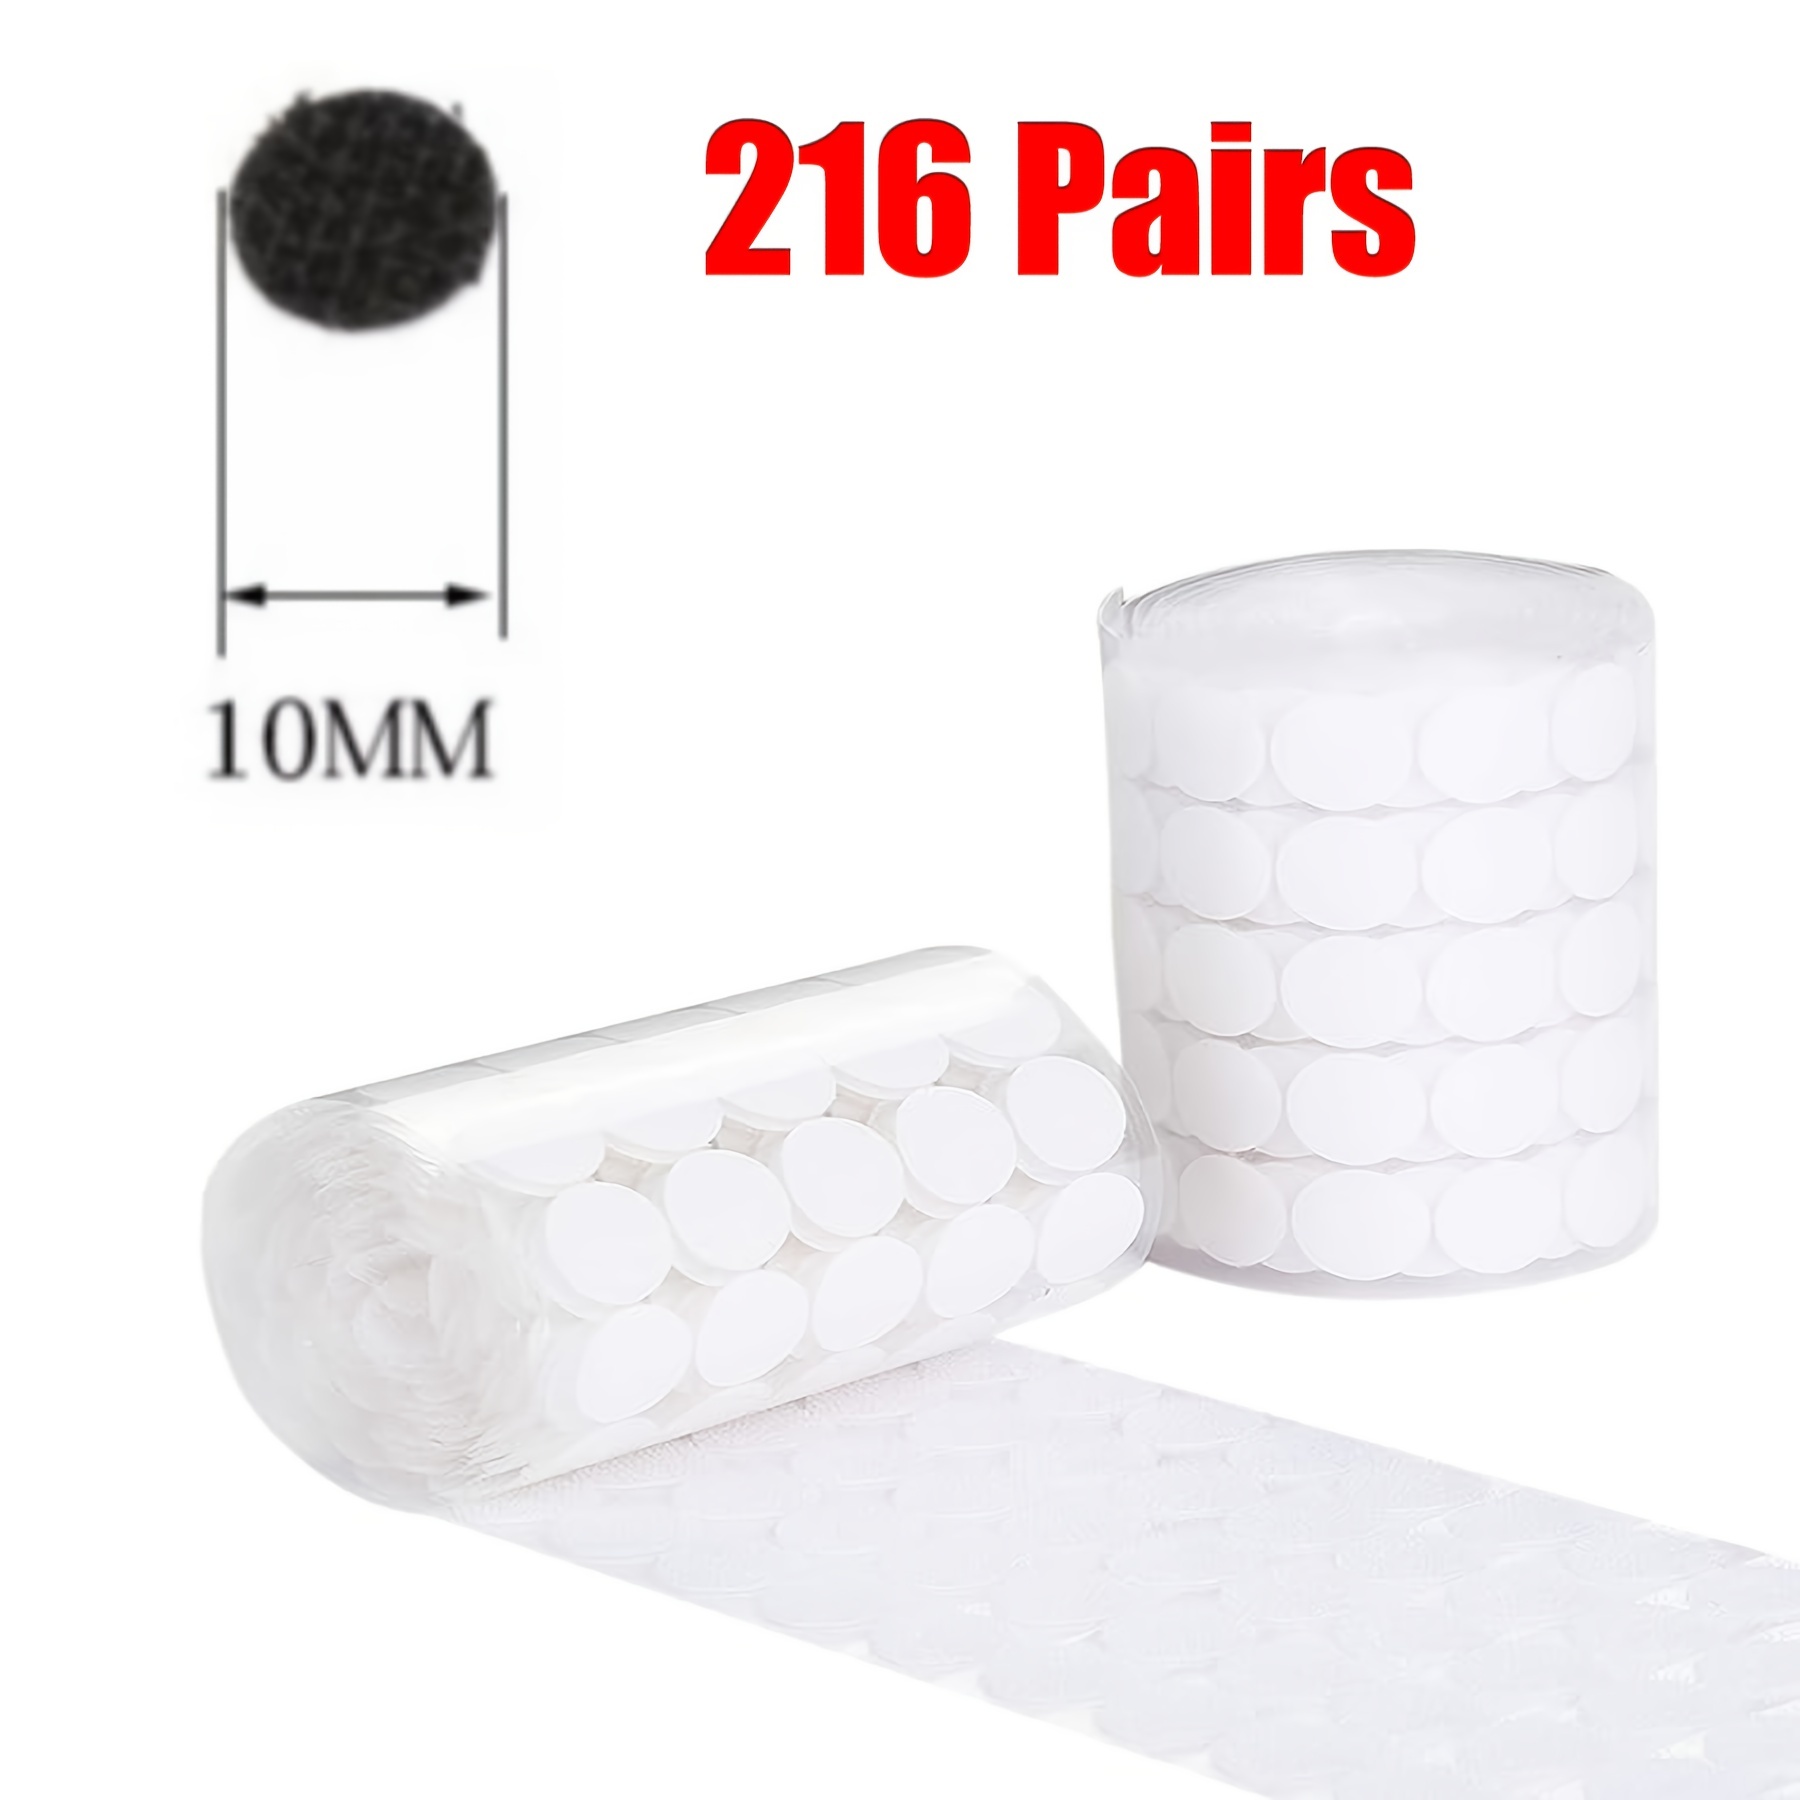 500 Pairs Self-adhesive Dots Tape Round Coins Sticky Dots Tape Mat Carpet  Non-slip Fastener